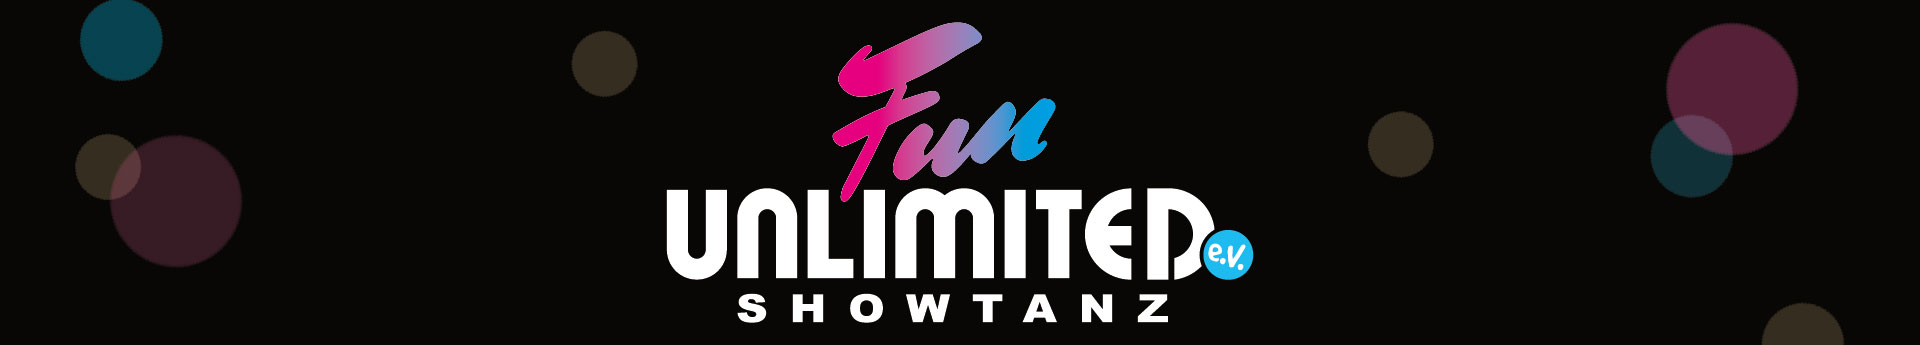 FunUnlimited Title Image